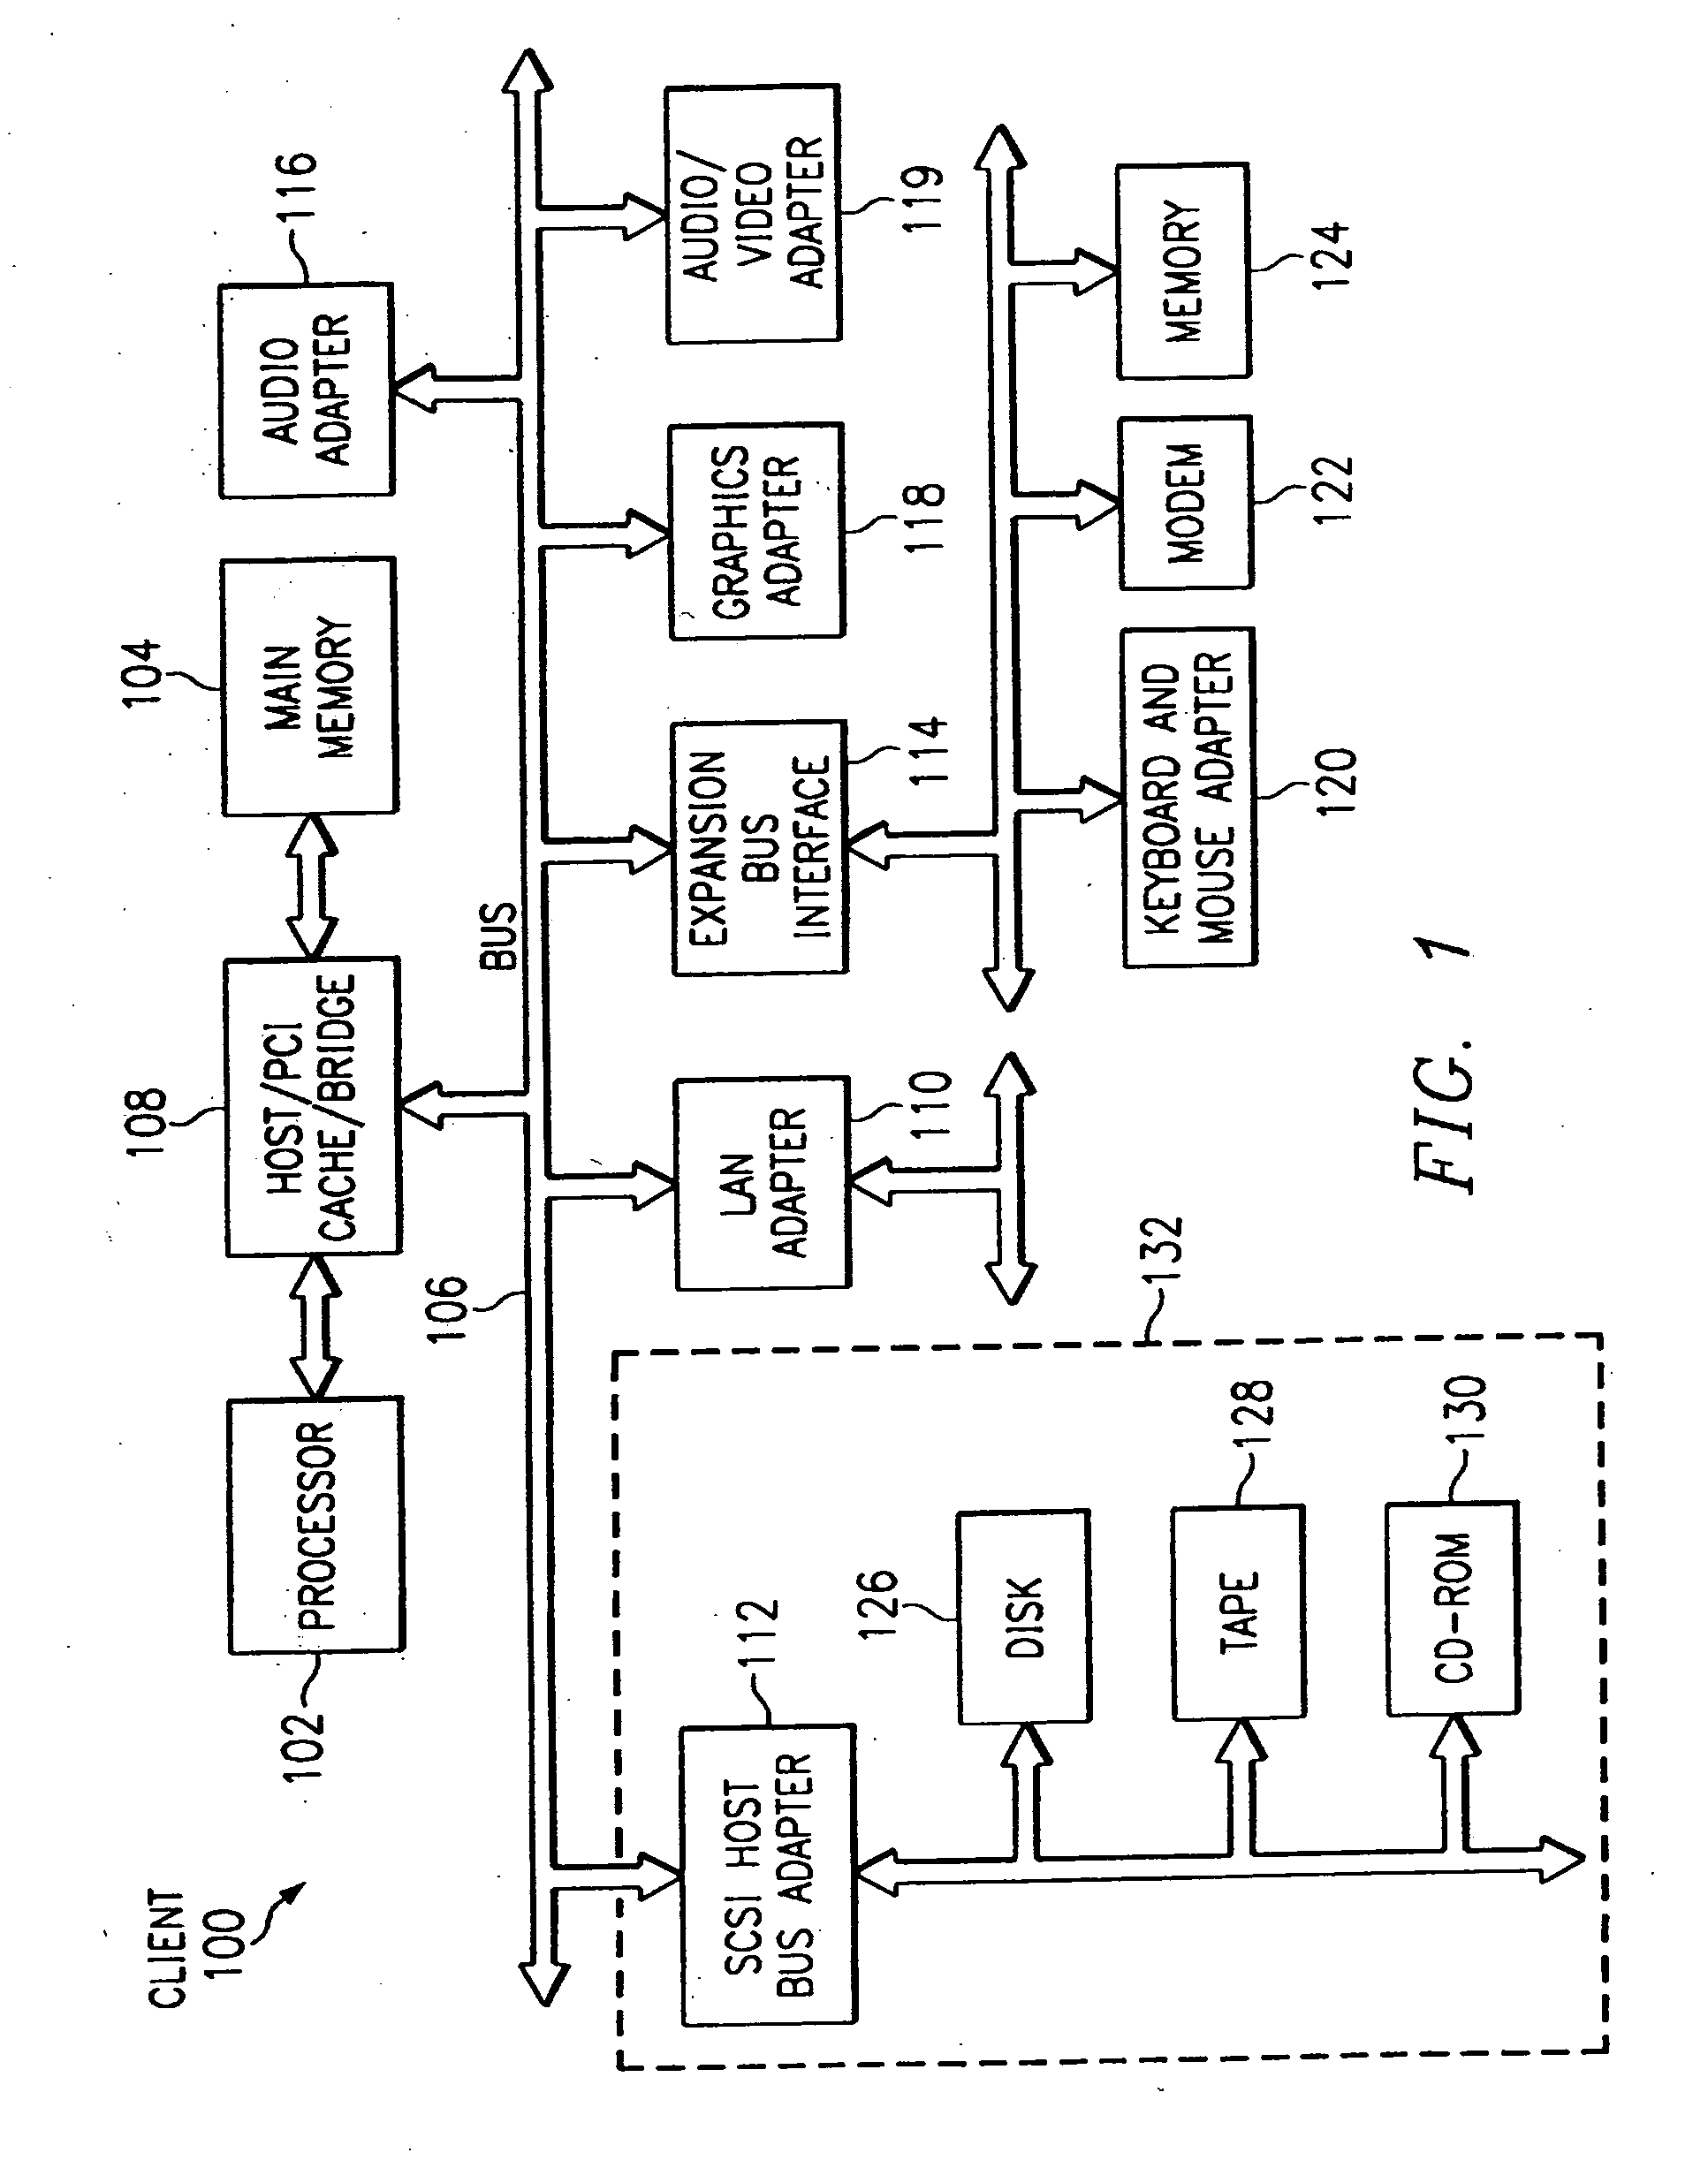 Method of implementing precise, localized hardware-error workarounds under centralized control